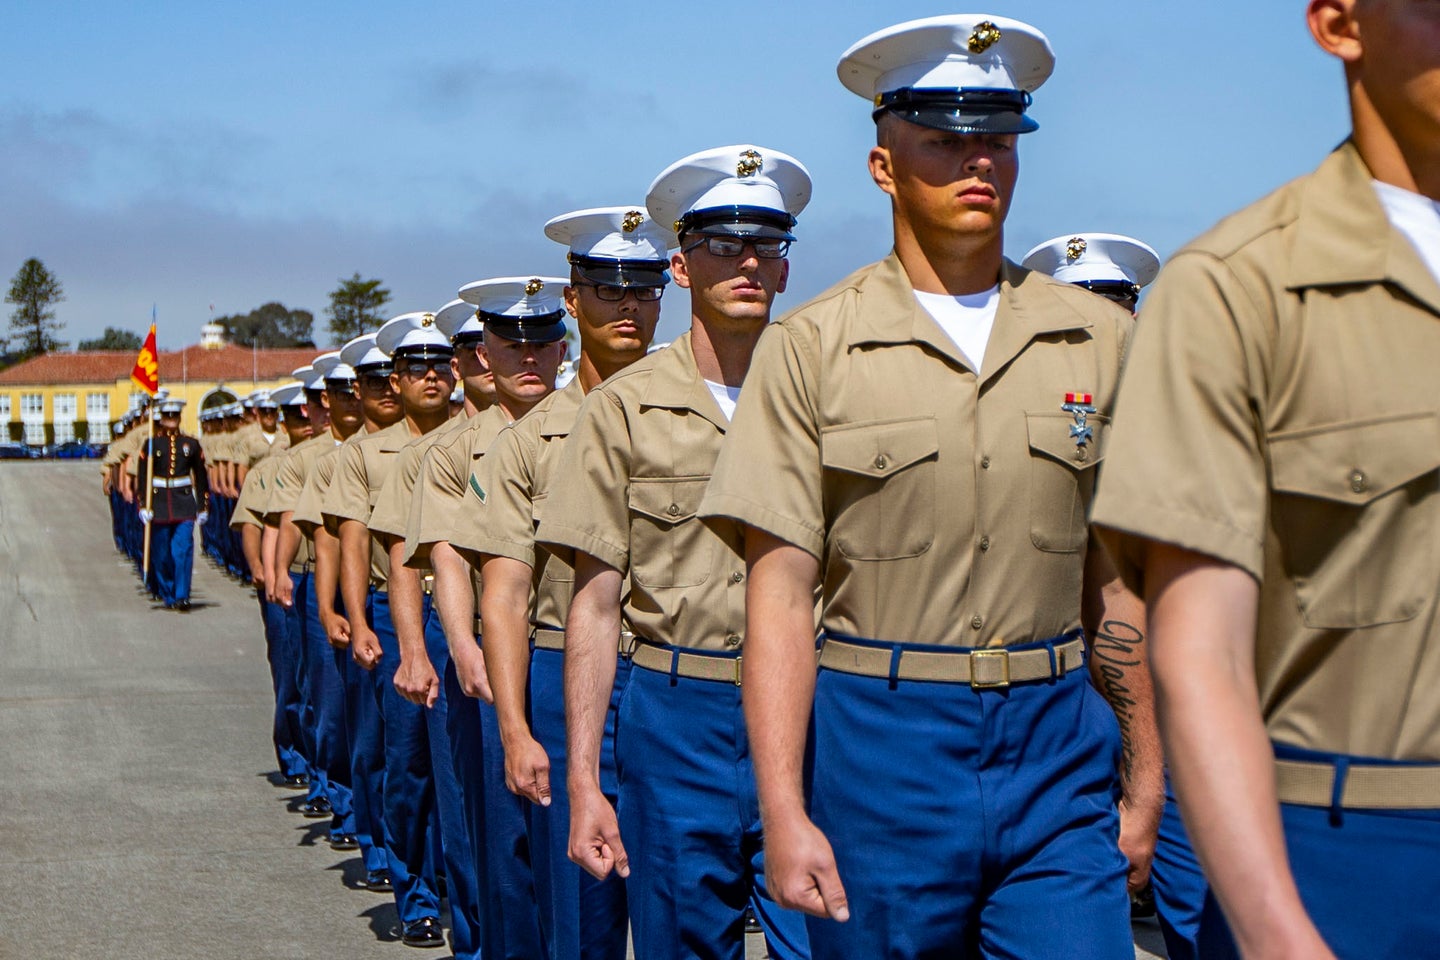 New U.S. Marines of Charlie Company, 1st Recruit Training Battalion, march in formation during a graduation ceremony at Marine Corps Recruit Depot, San Diego, July 30, 2021. Graduation took place at the completion of the 13-week transformation including training for drill, marksmanship, basic combat skills and Marines Corps customs and traditions. (U.S. Marine Corps photo by Lance Cpl. Grace J. Kindred)